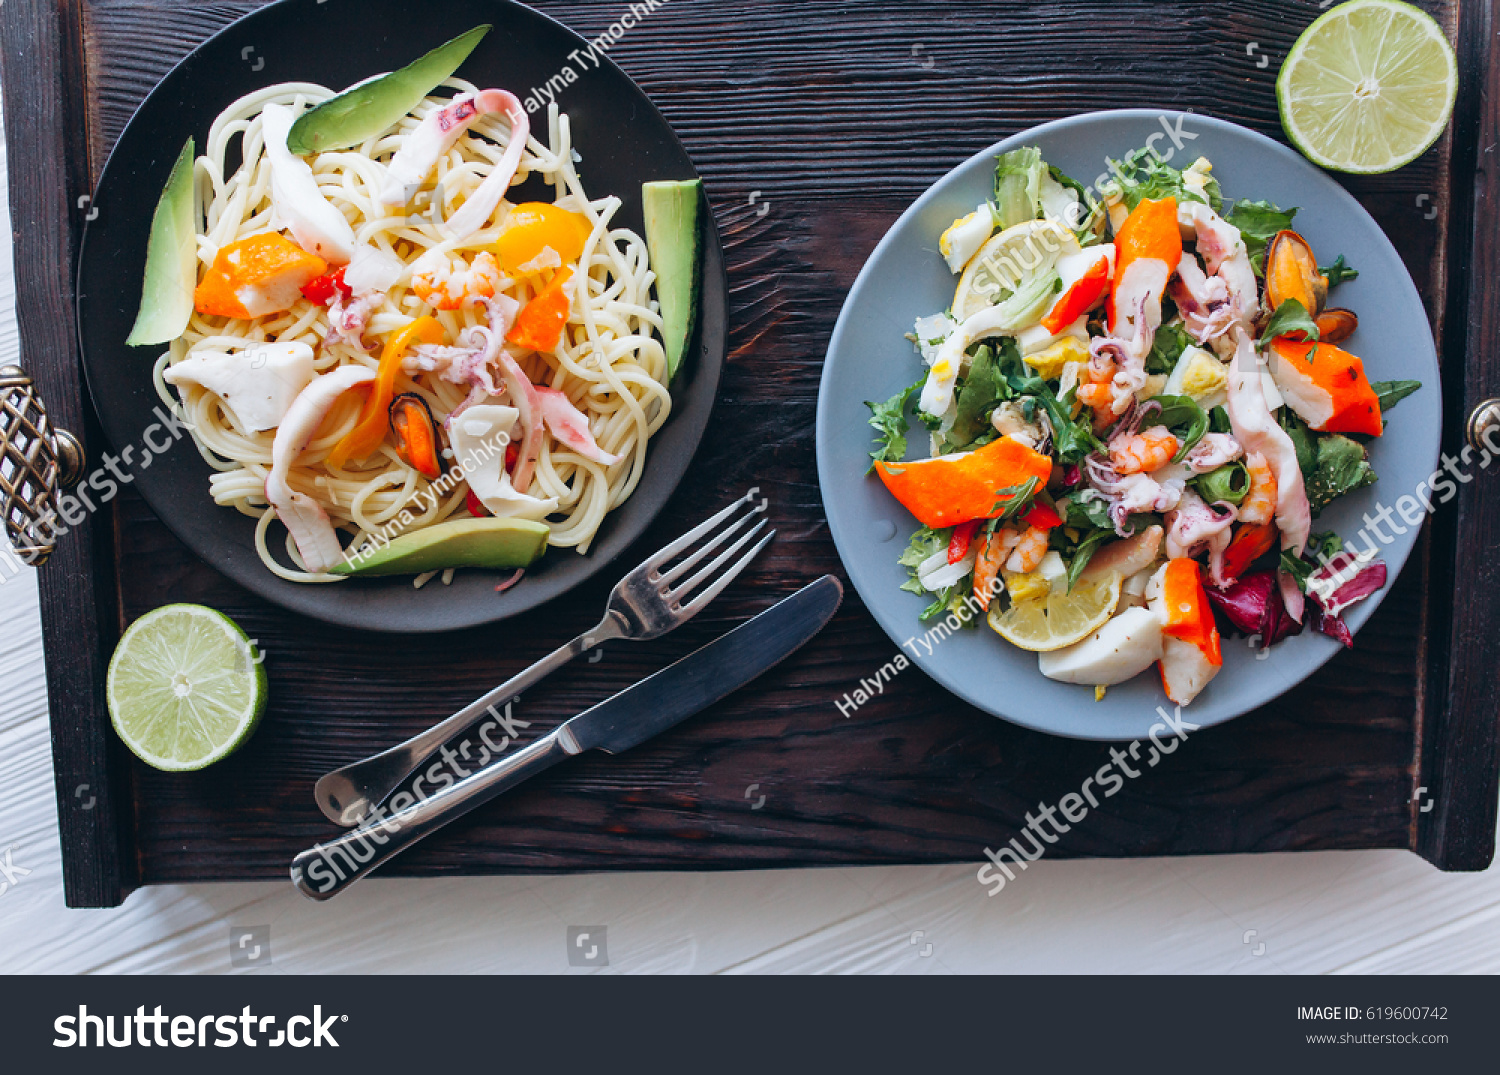 salad and pasta with seafood on wooden background #619600742